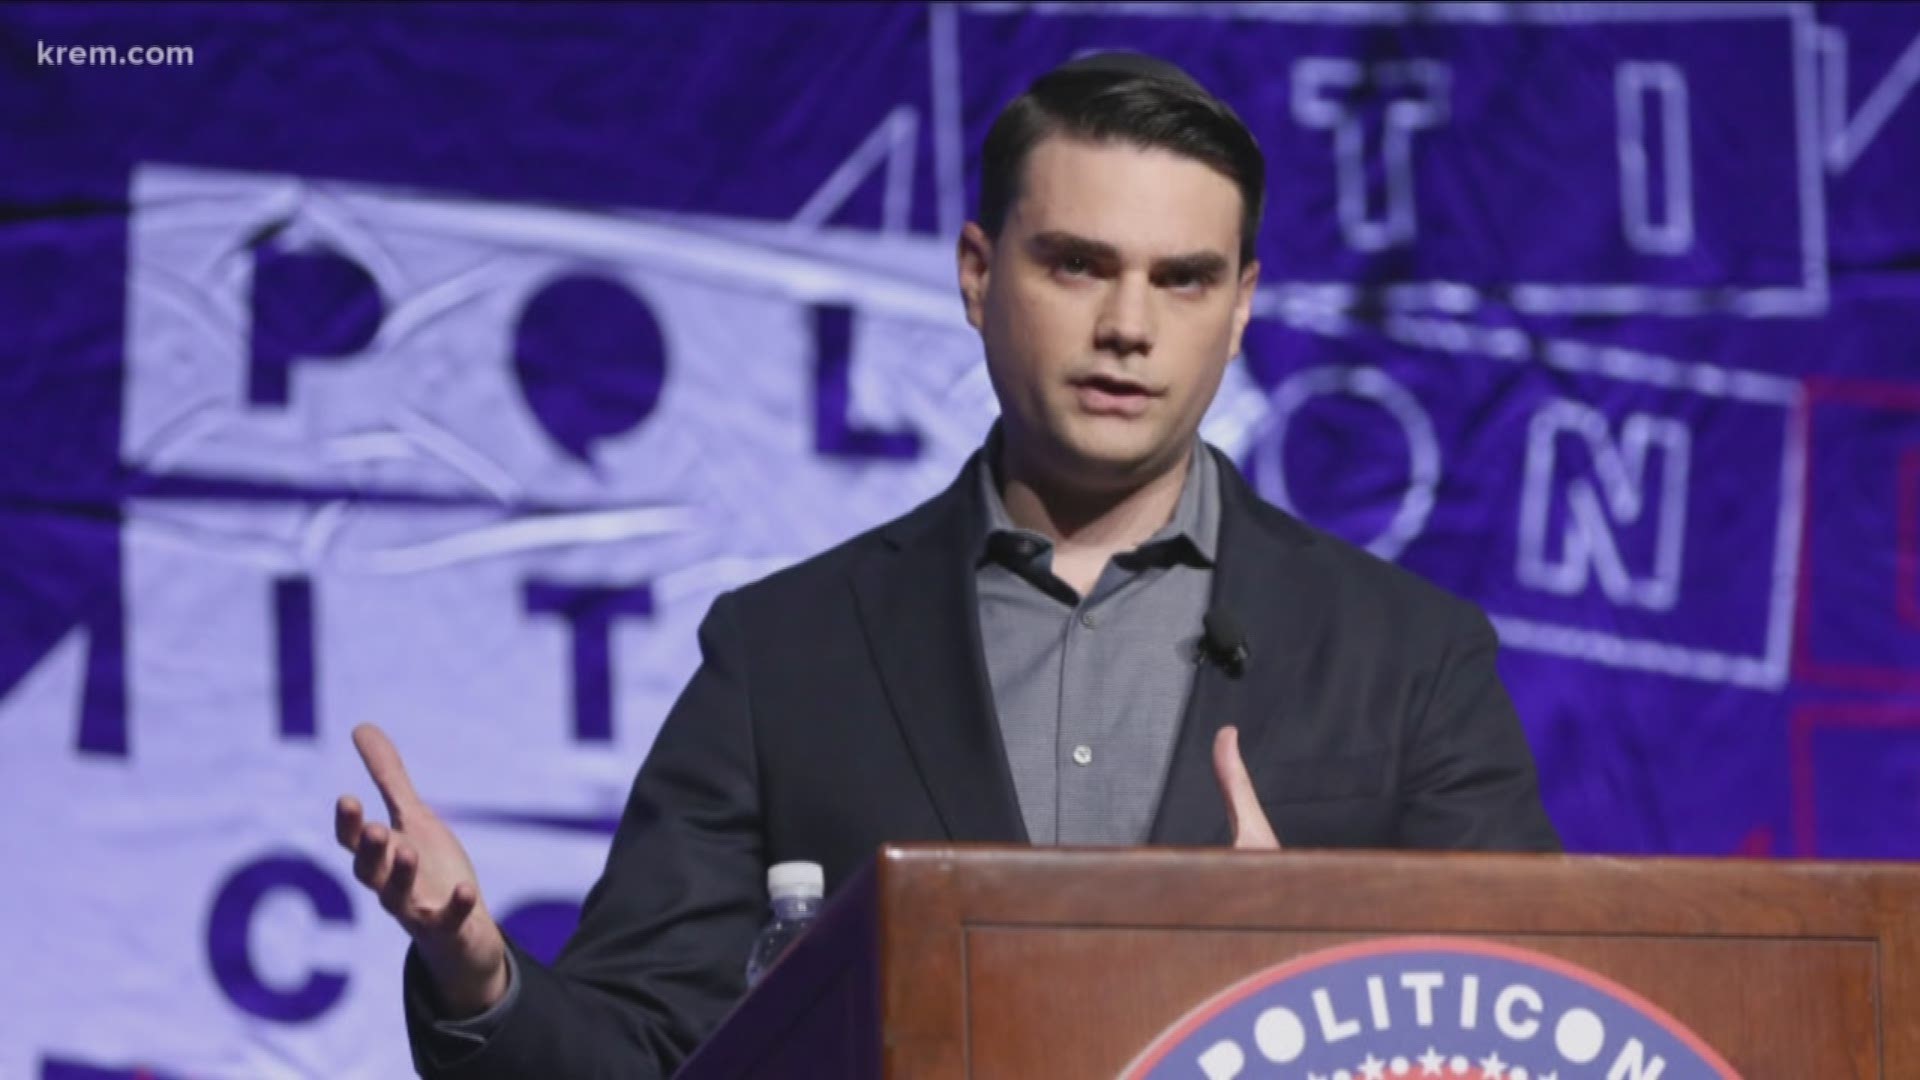 The university previously denied the College Republicans' request to invite political commentator Ben Shapiro to speak on campus.